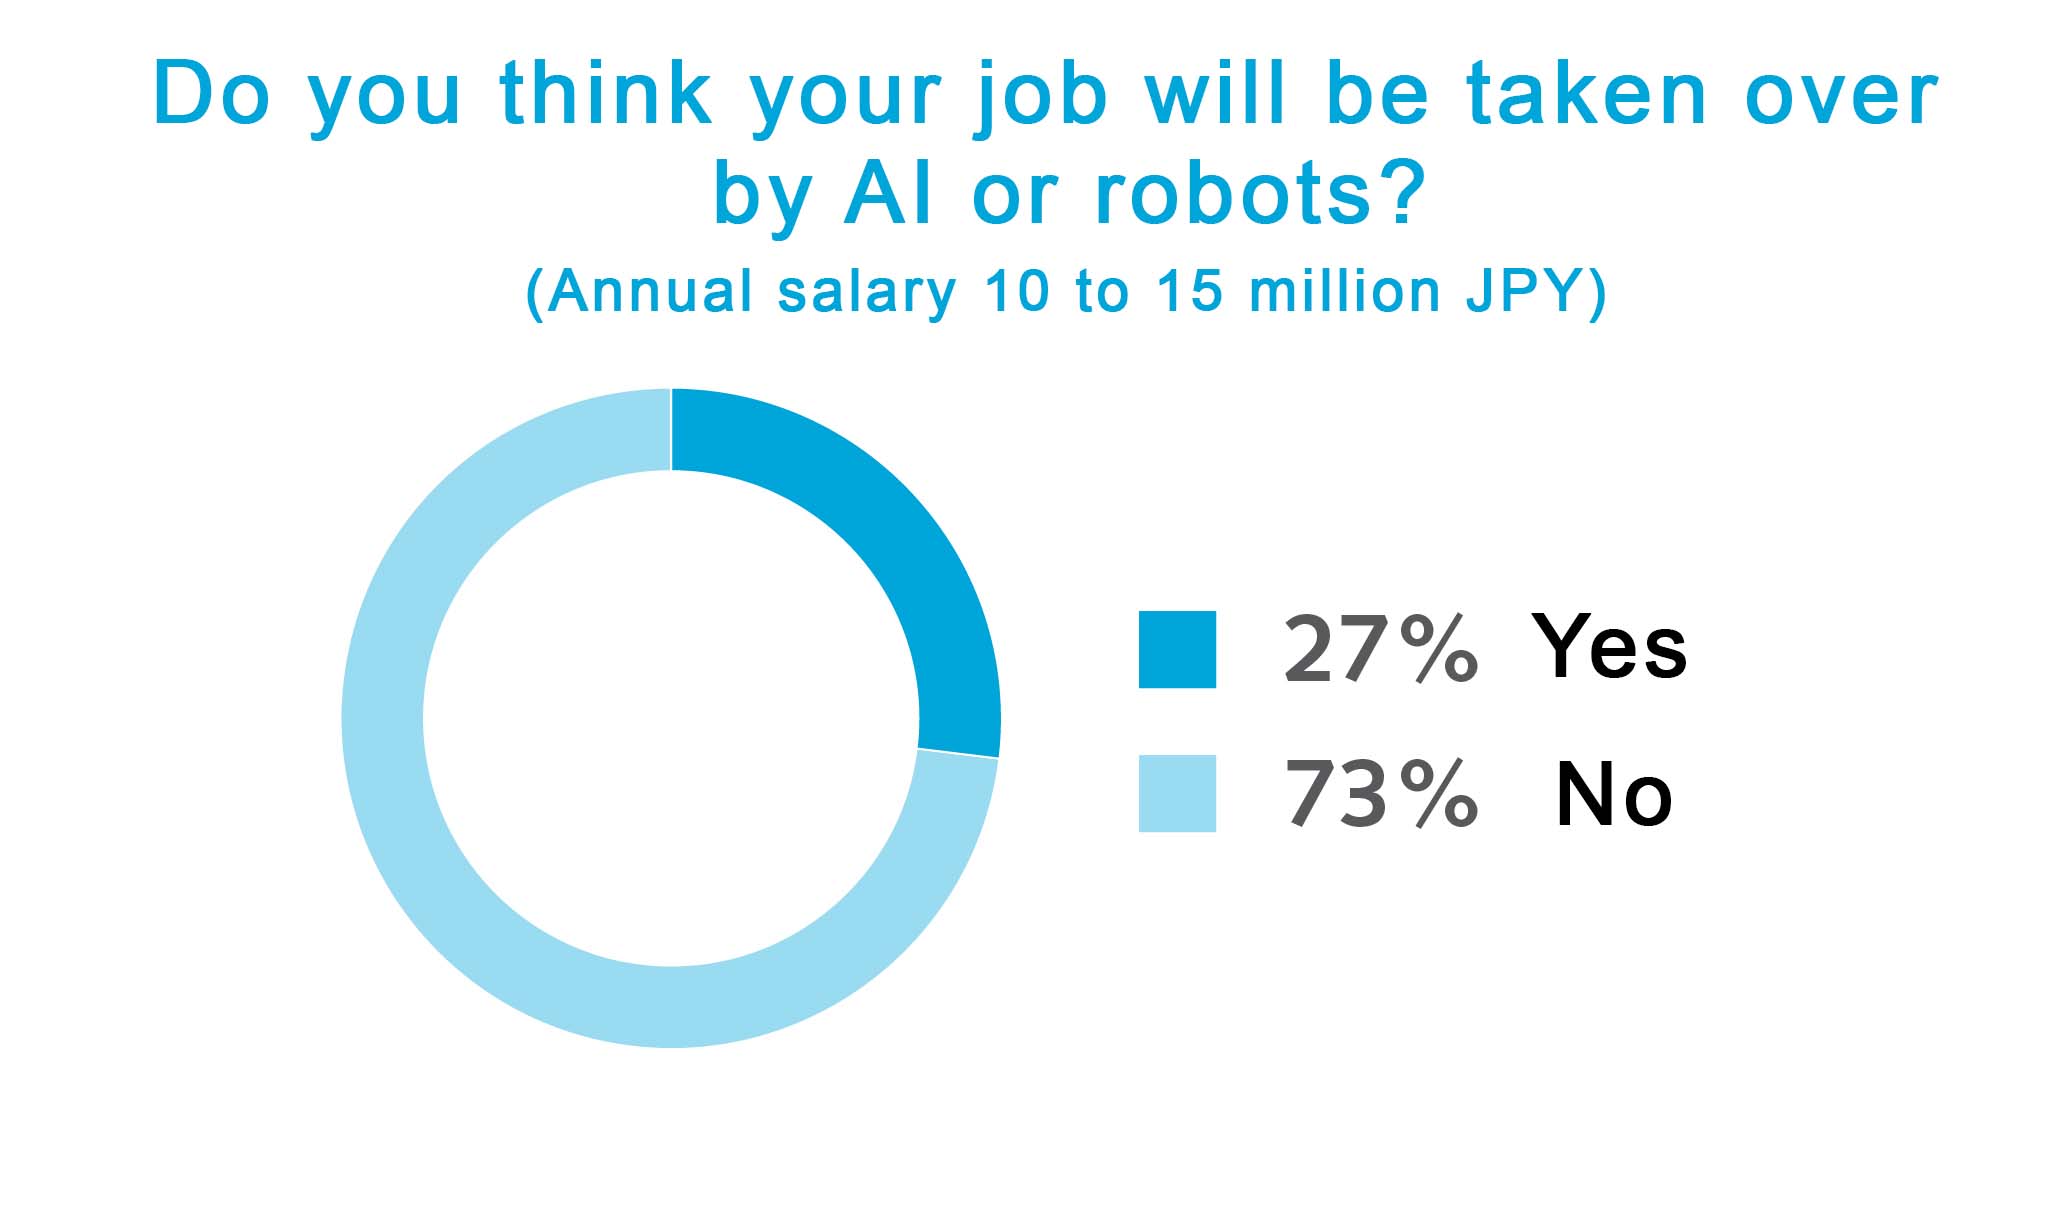 Do you think your job will be taken over by AI or robots? (Annual salary 10 to 15 million JPY)